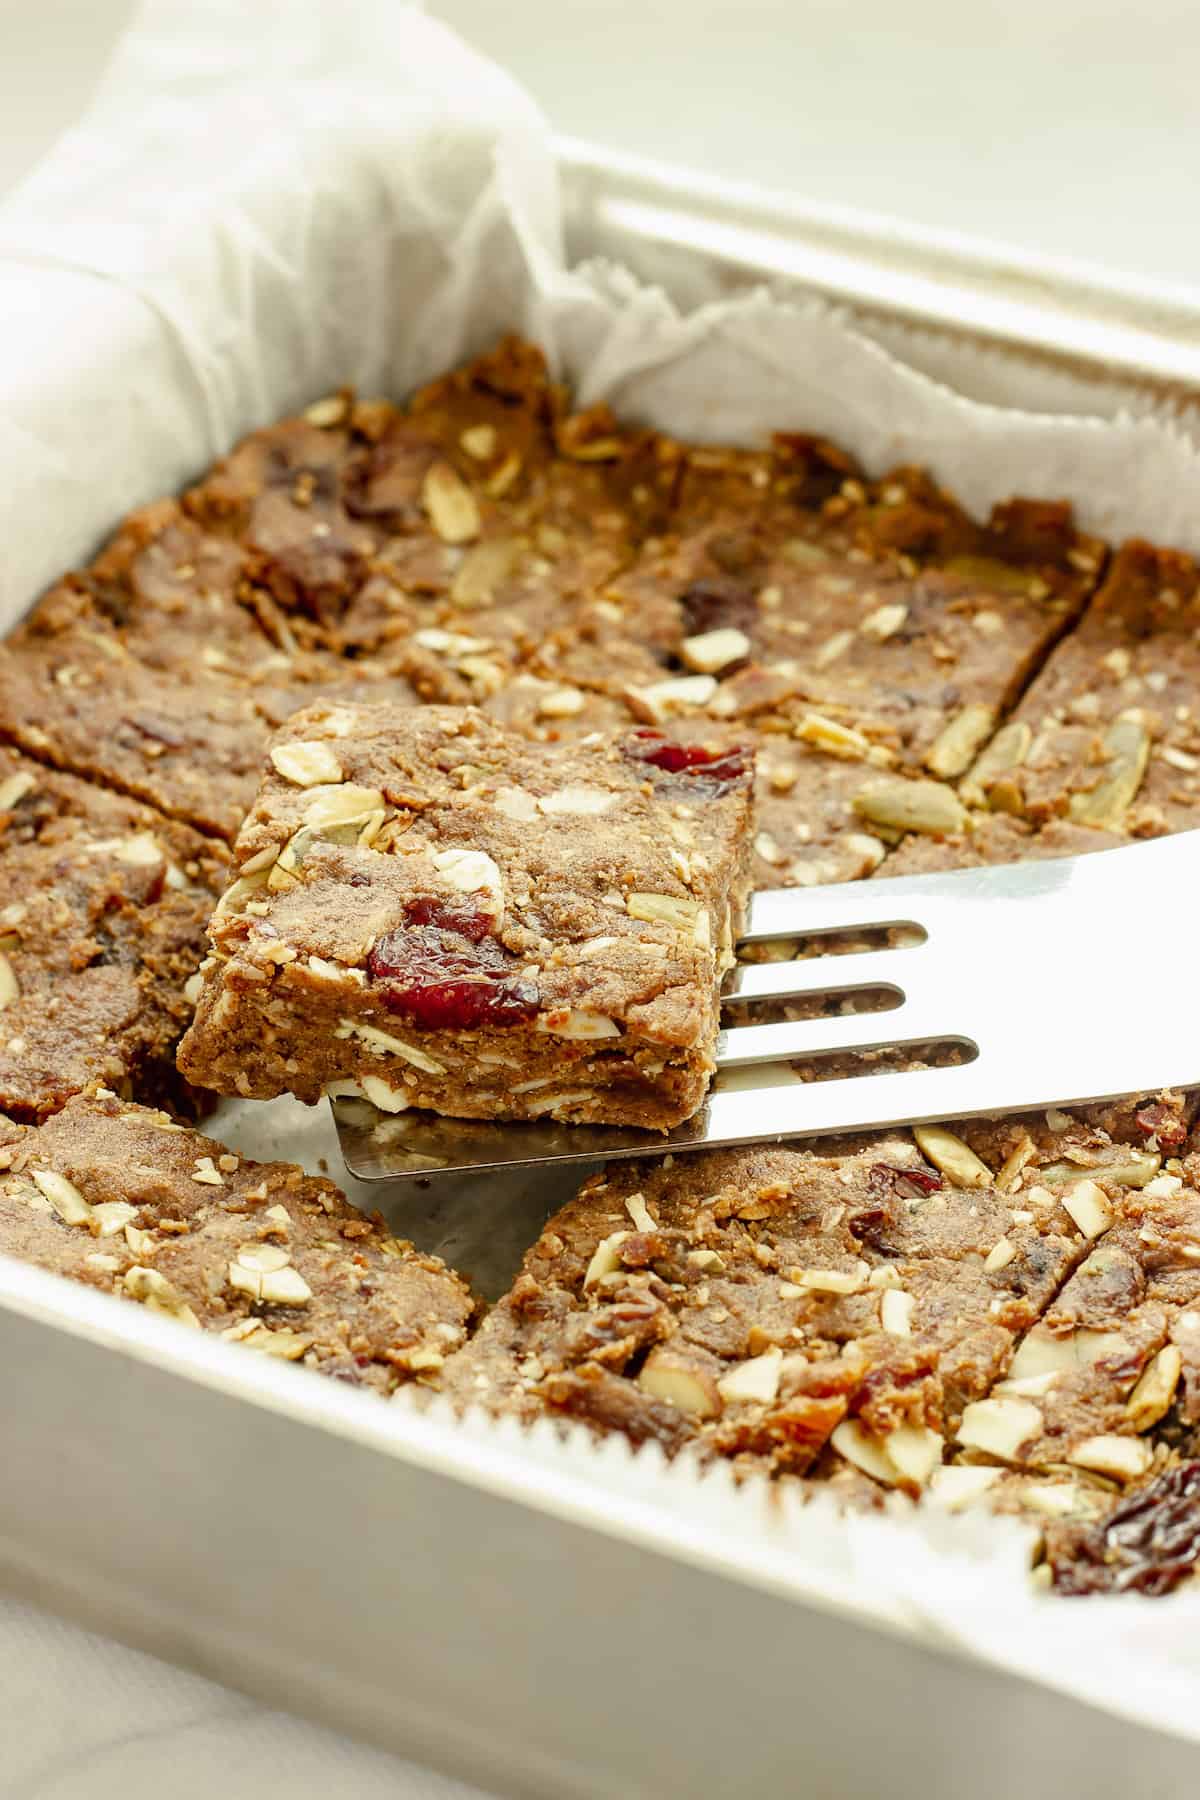 A pan of fruit and nut bars. A spatula is lifting one bar out of the pan.